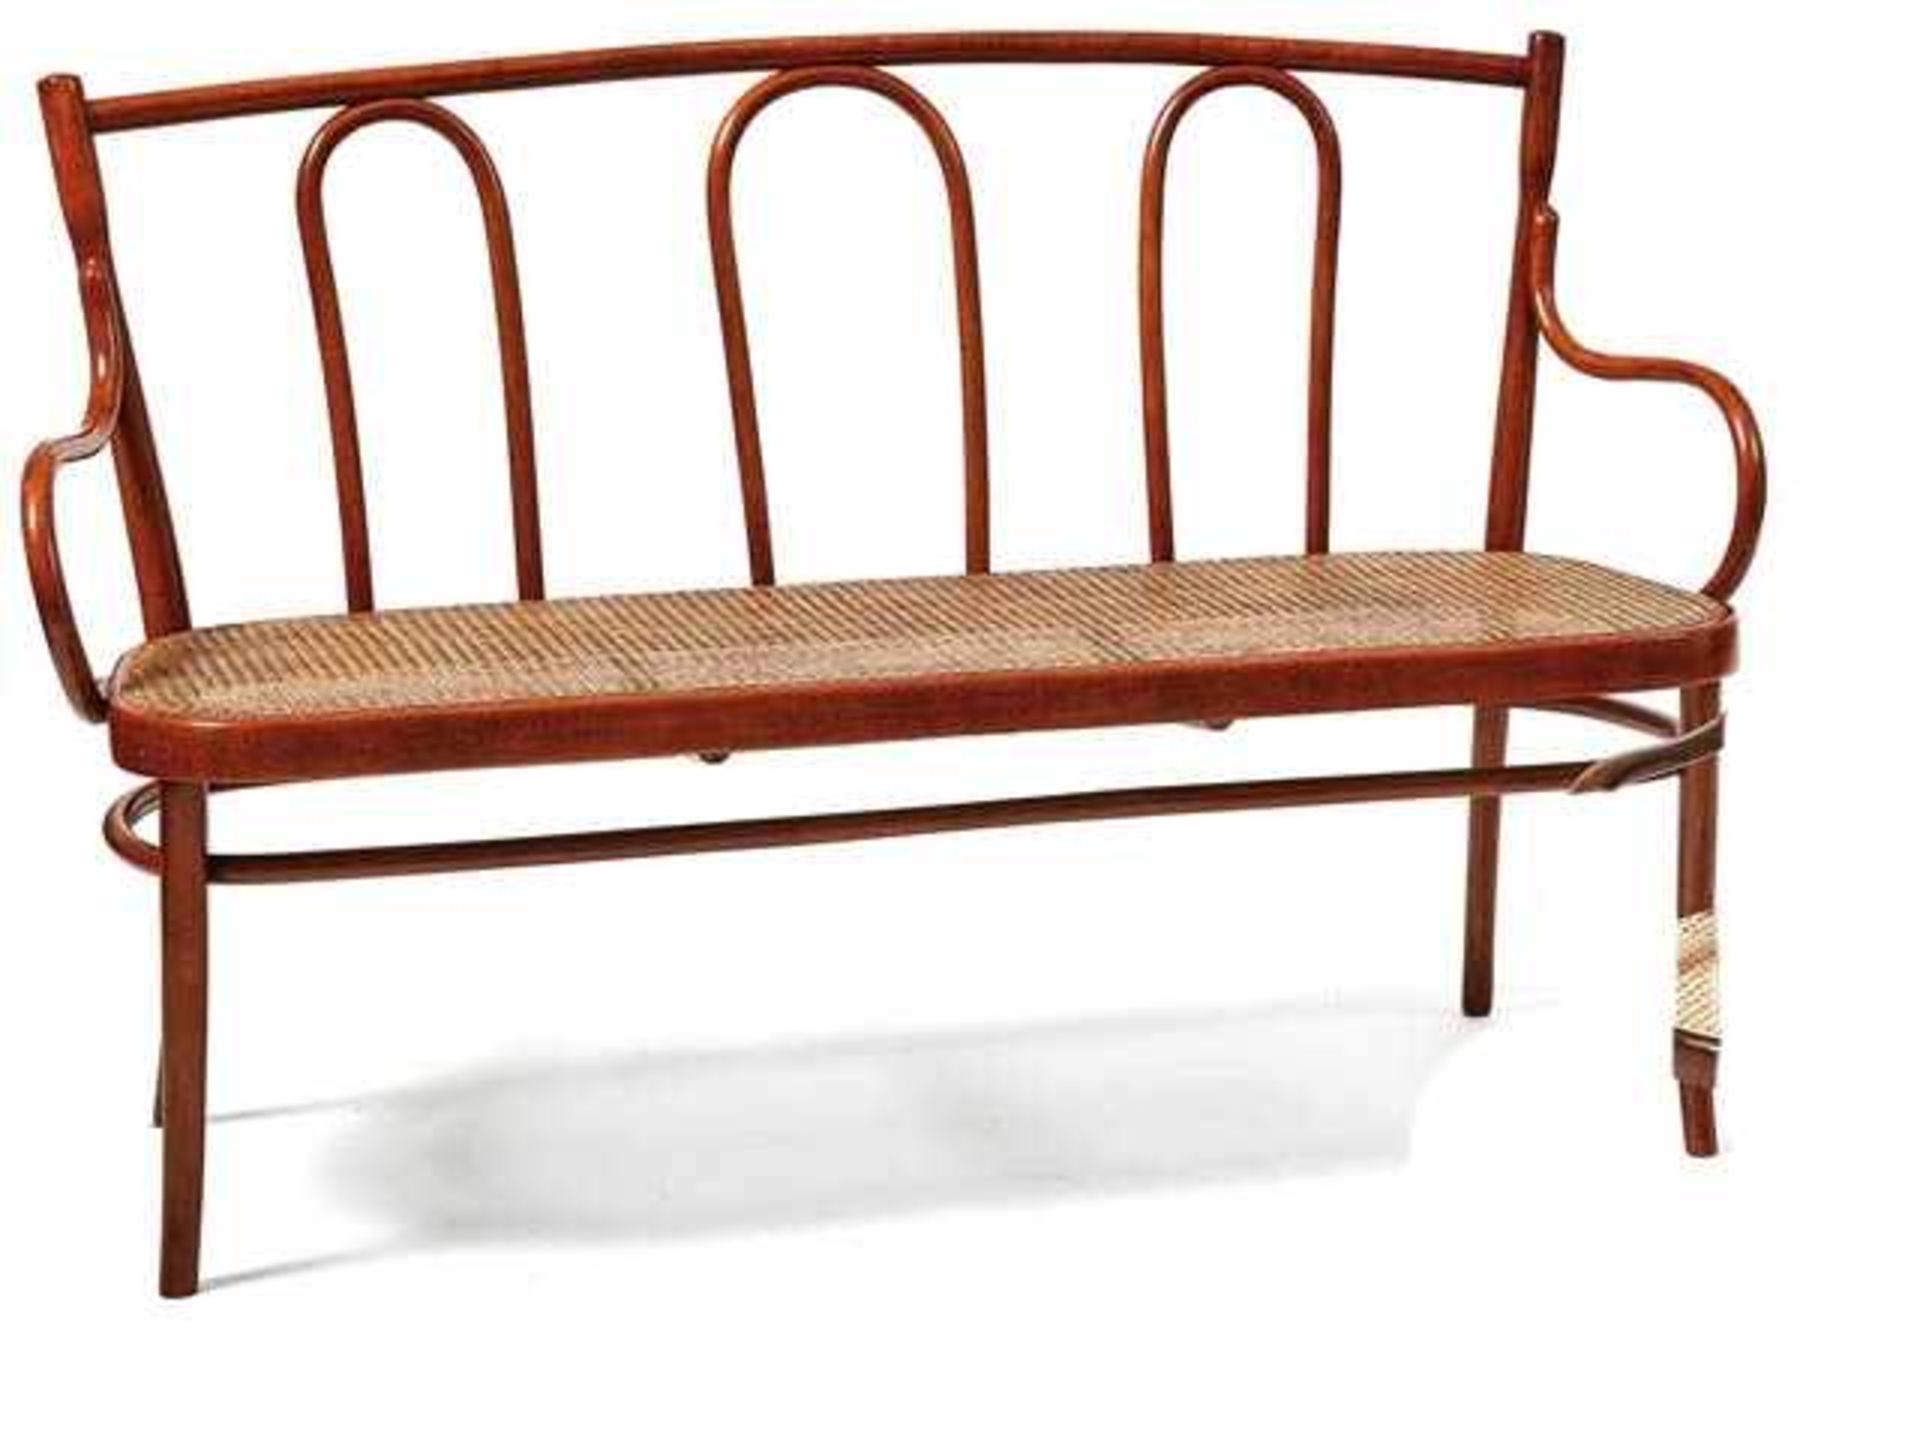 BenchProbably Gebrüder Thonet, Vienna - around 1890/1900Frame made of bentwood tubing, the seat with